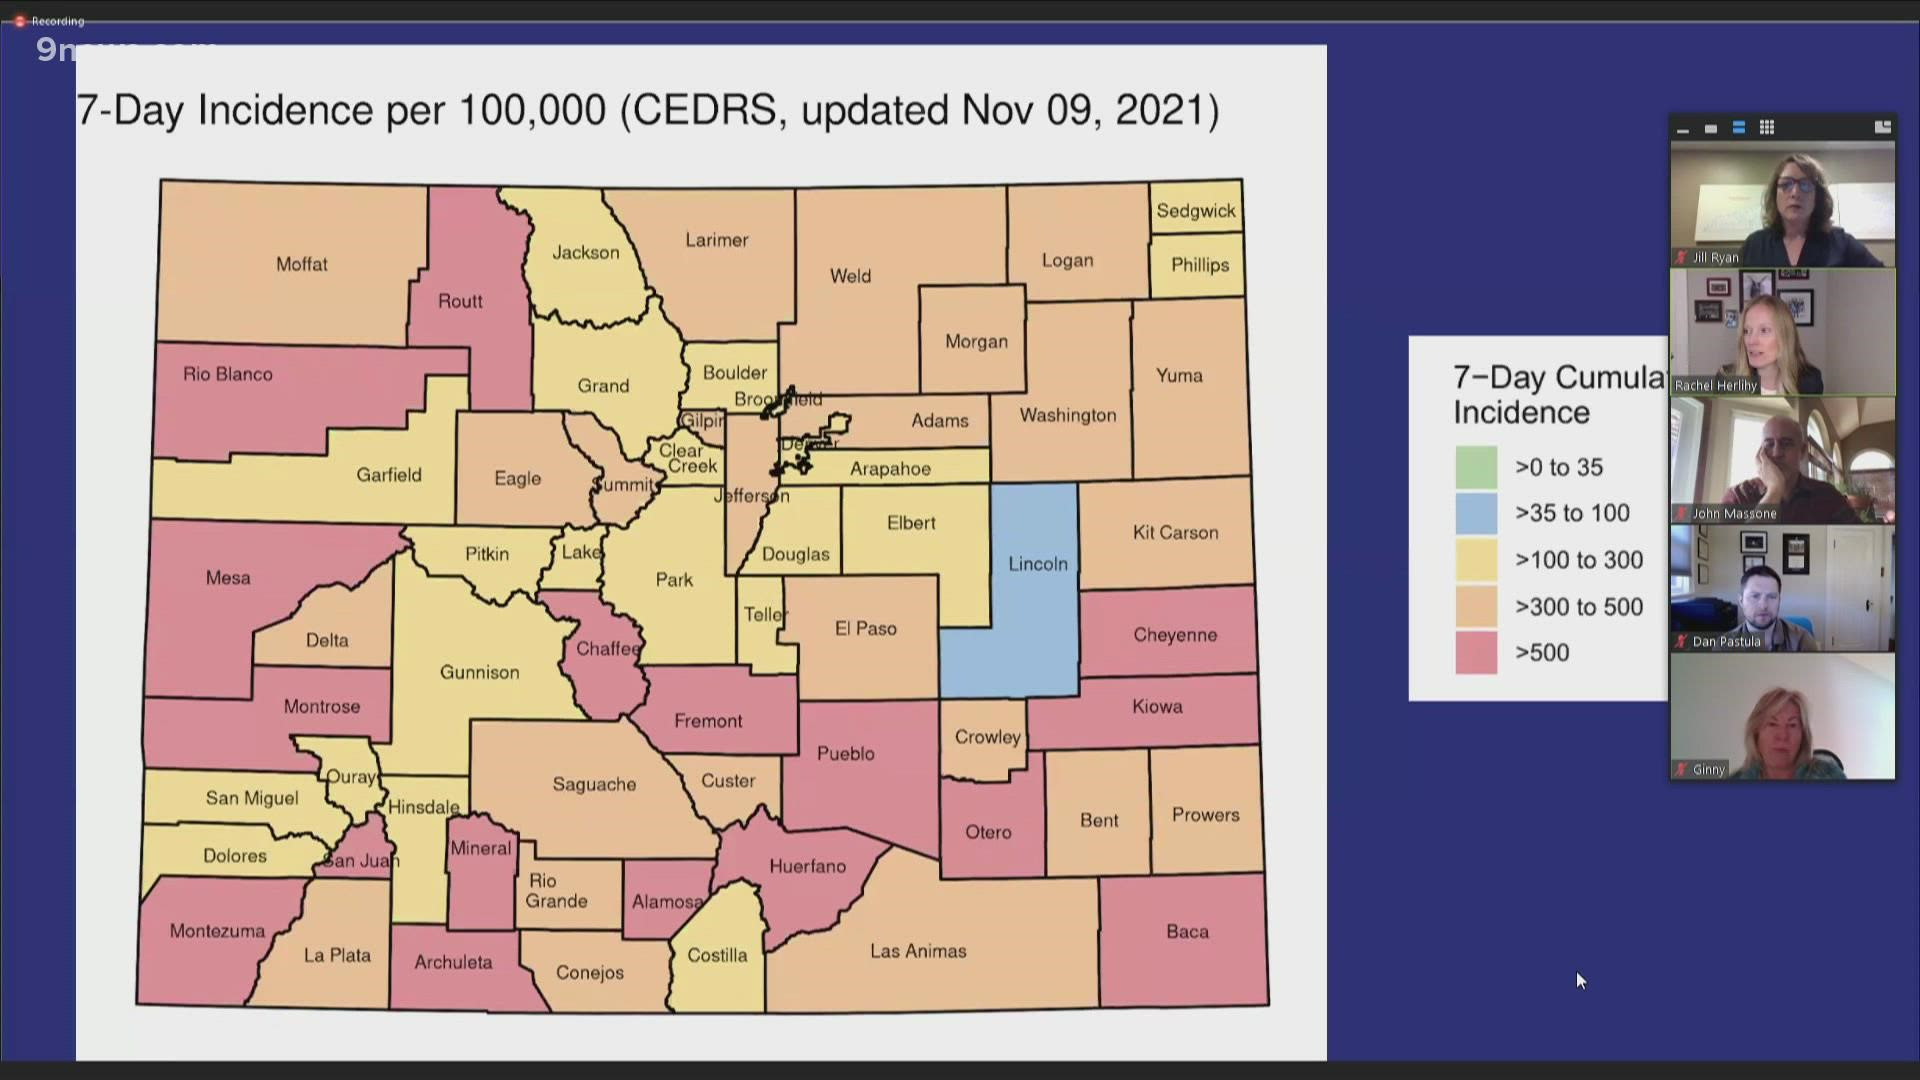 New modeling shows COVID-19 hospitalizations in Colorado will exceed the available hospital beds by the end of December.